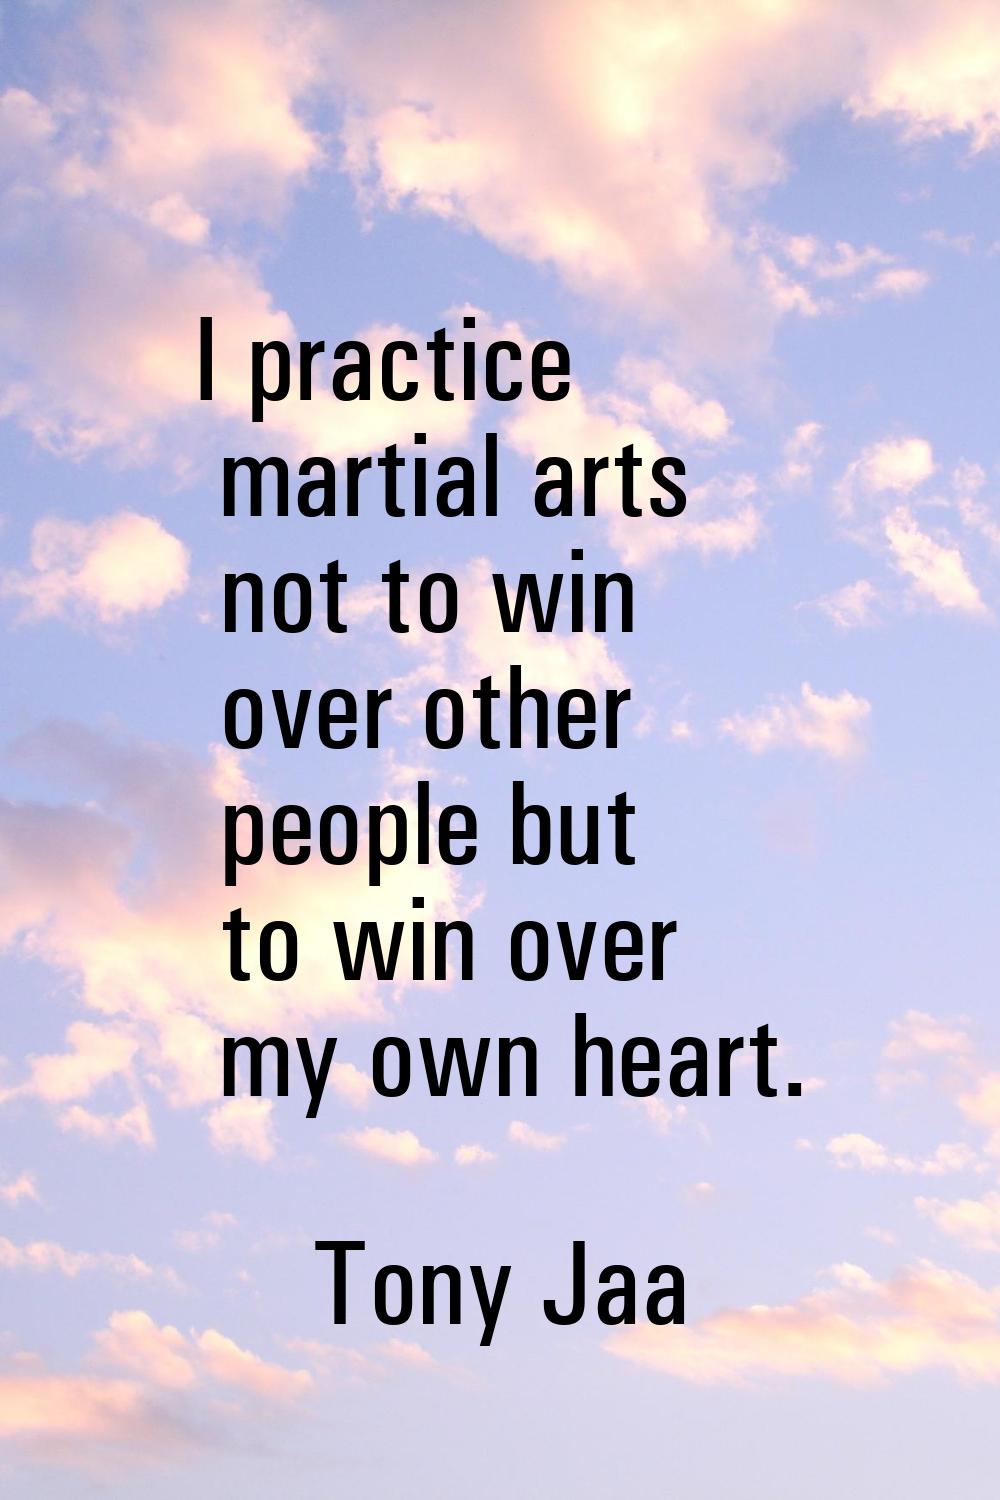 I practice martial arts not to win over other people but to win over my own heart.